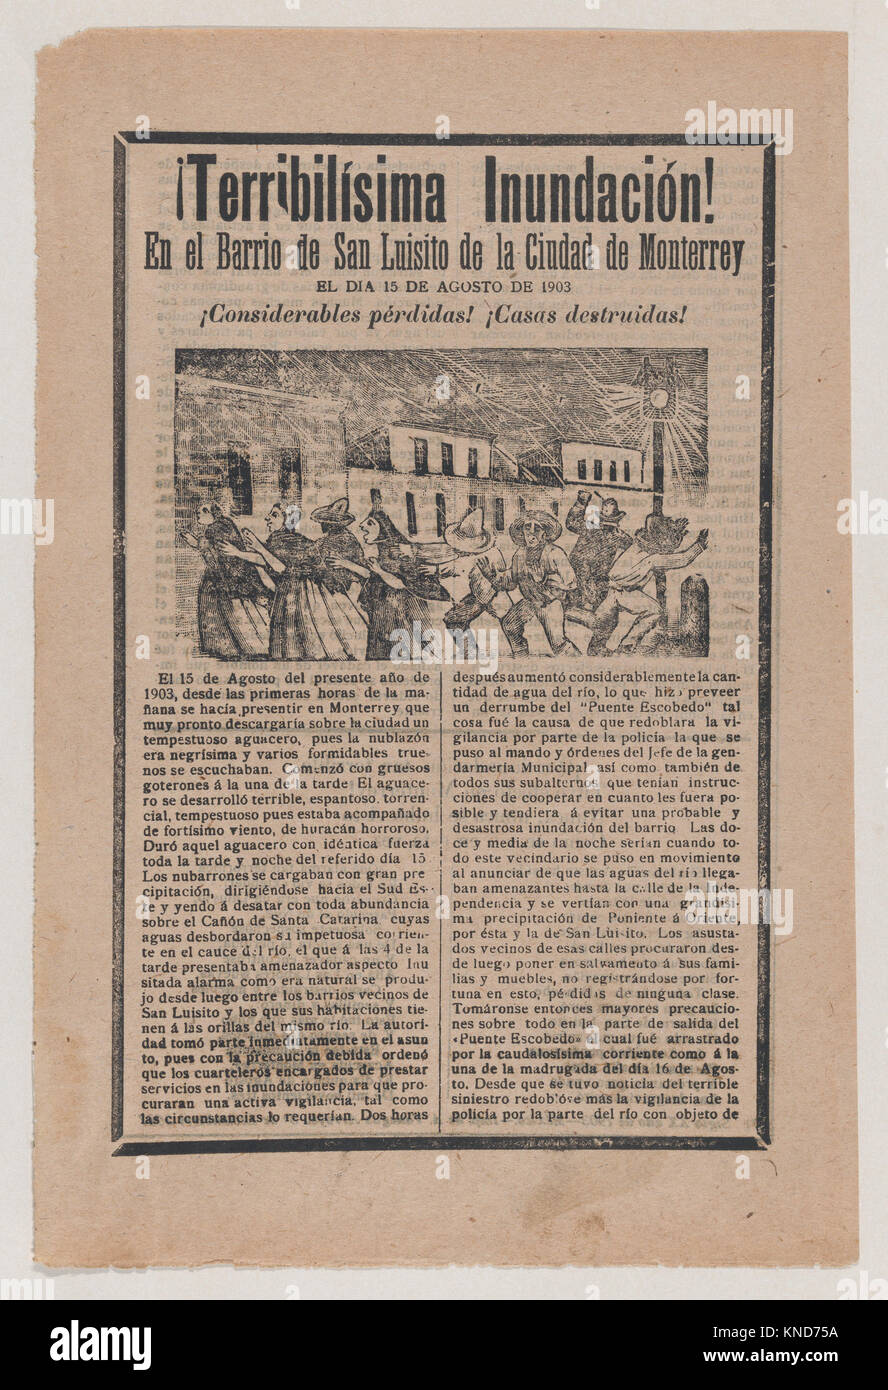 Broadsheet relating to the terrible flood in the barrio of San Luisito in the city of Monterrey on 15 August 1903, a description in the bottom section MET DP869127 717465 Artist: Jos? Guadalupe Posada, Mexican, 1851?1913, Publisher: Antonio Vanegas Arroyo, 1850?1917, Mexican, Broadsheet relating to the terrible flood in the barrio of San Luisito in the city of Monterrey on 15 August 1903, a description in the bottom section, 1903, Photorelief and letterpress on tan paper, Sheet: 12 in. ? 7 15/16 in. (30.5 ? 20.2 cm). The Metropolitan Museum of Art, New York. The Elisha Whittelsey Collection, T Stock Photo